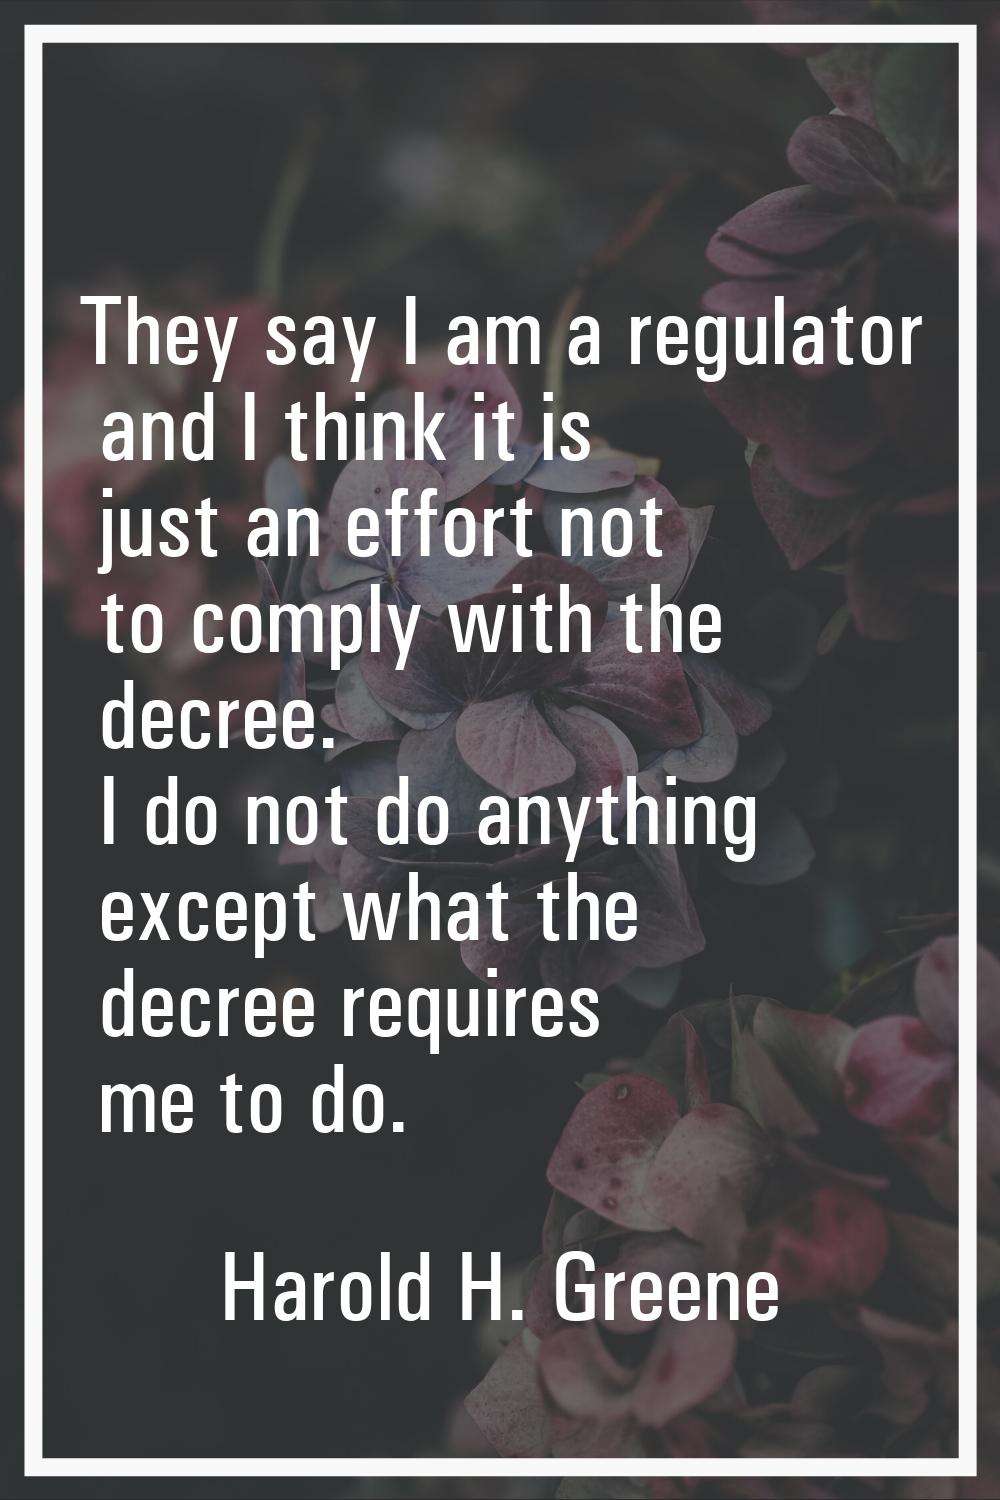 They say I am a regulator and I think it is just an effort not to comply with the decree. I do not 